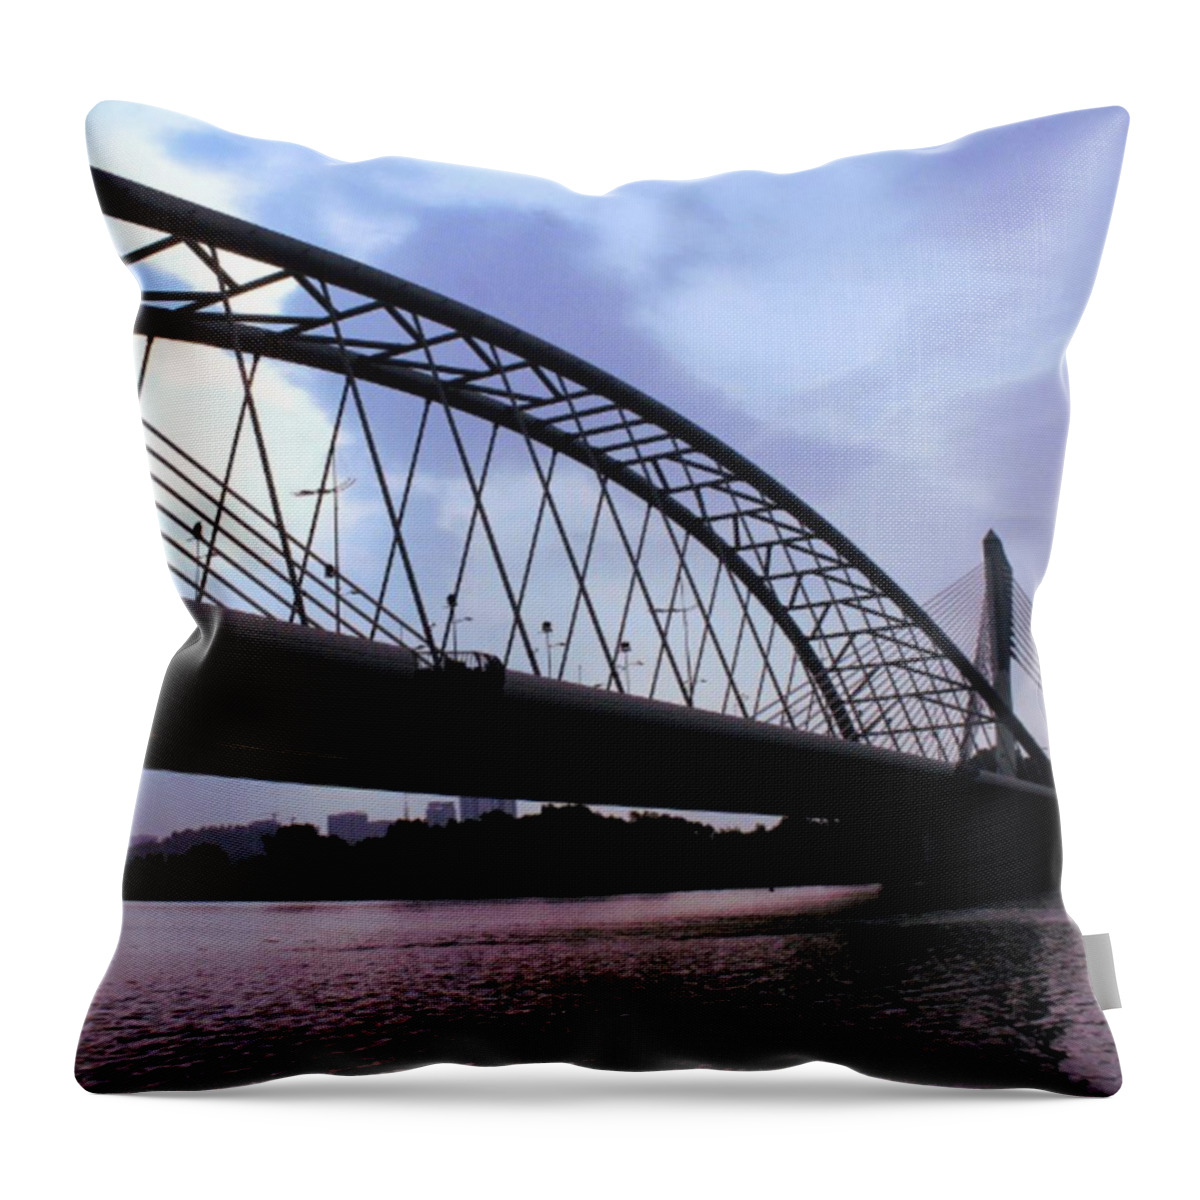 Bridge Throw Pillow featuring the photograph This Is Not Sydney Harbour Bridge But by Pierz Photos Work